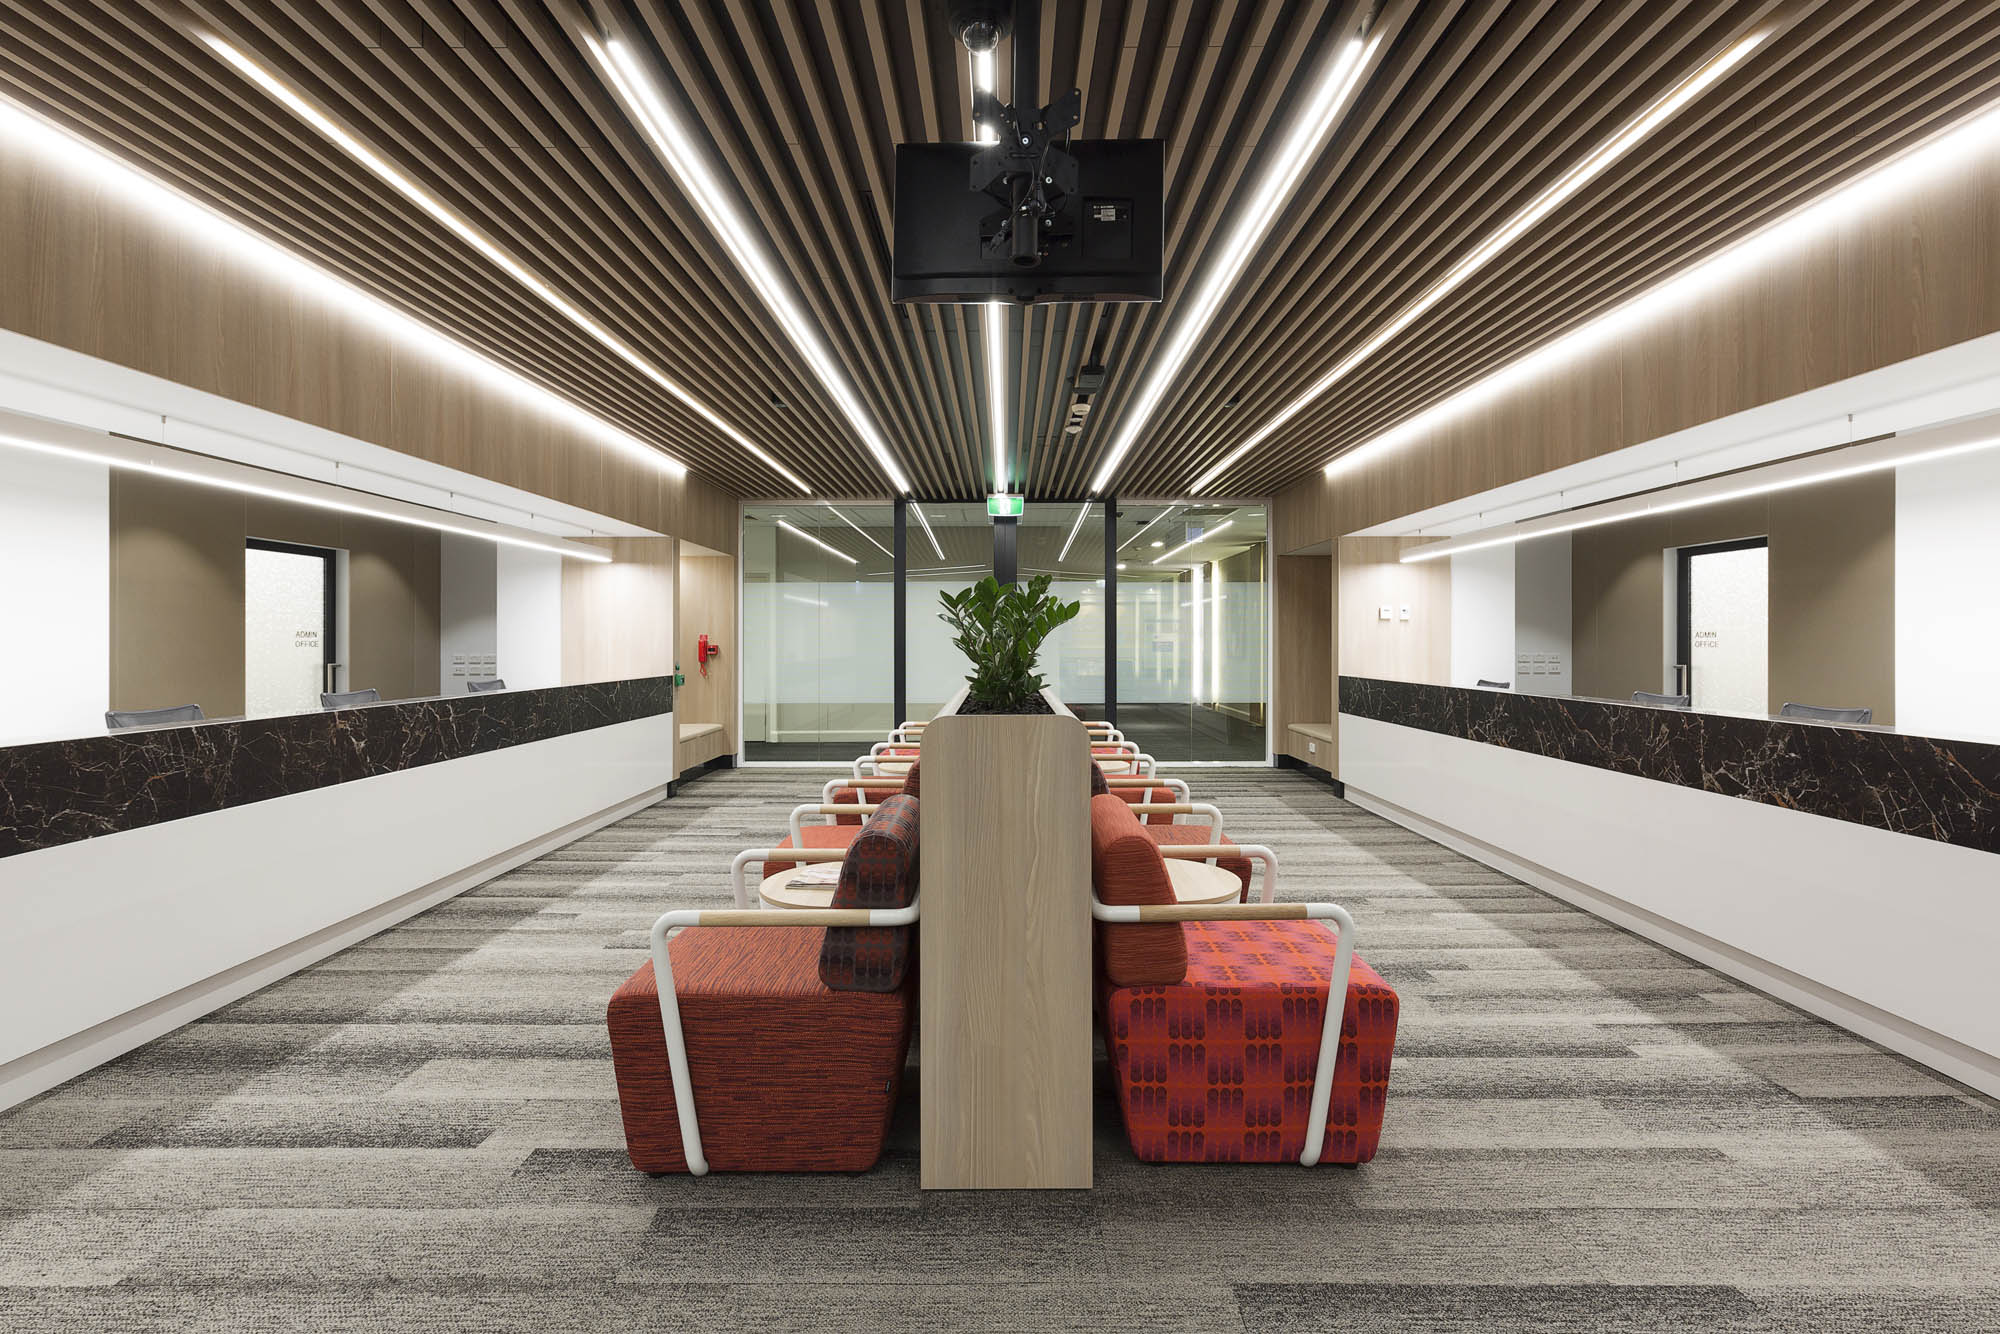 Macquarie Clinic University construction fitout health aged care reception lobby seating timber panelling ceiling recessed lighting